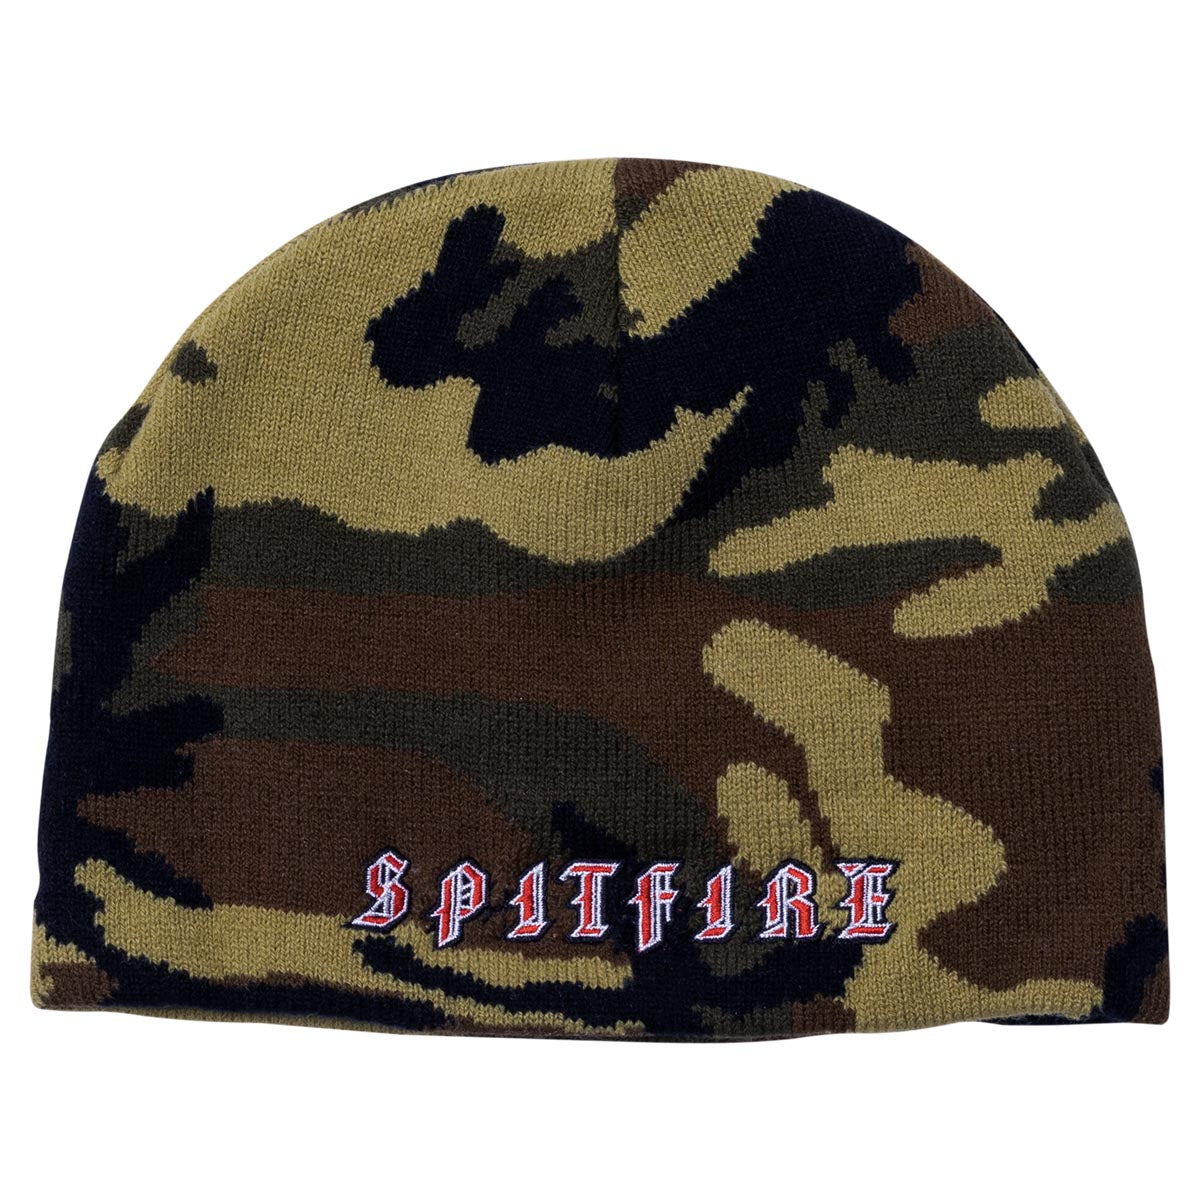 Spitfire Old E Skully Beanie - Camo/Red/White image 1